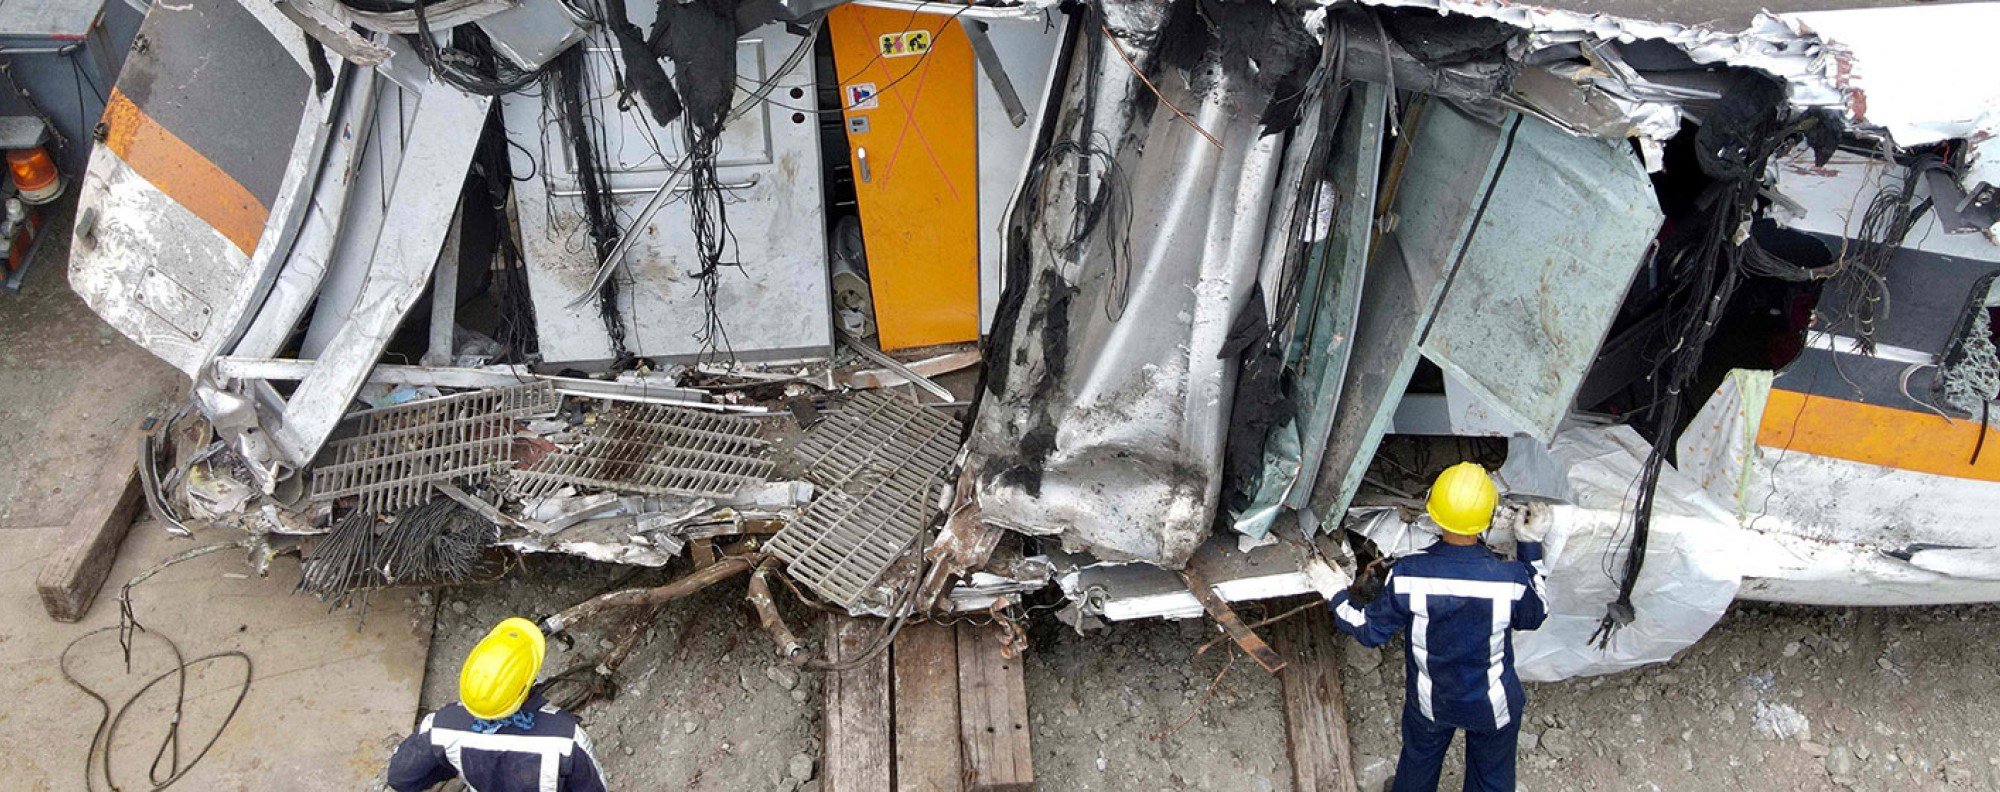 Workers checking damaged carriages at the site of Taiwan’s worst train accident in decades. Photo: AFP